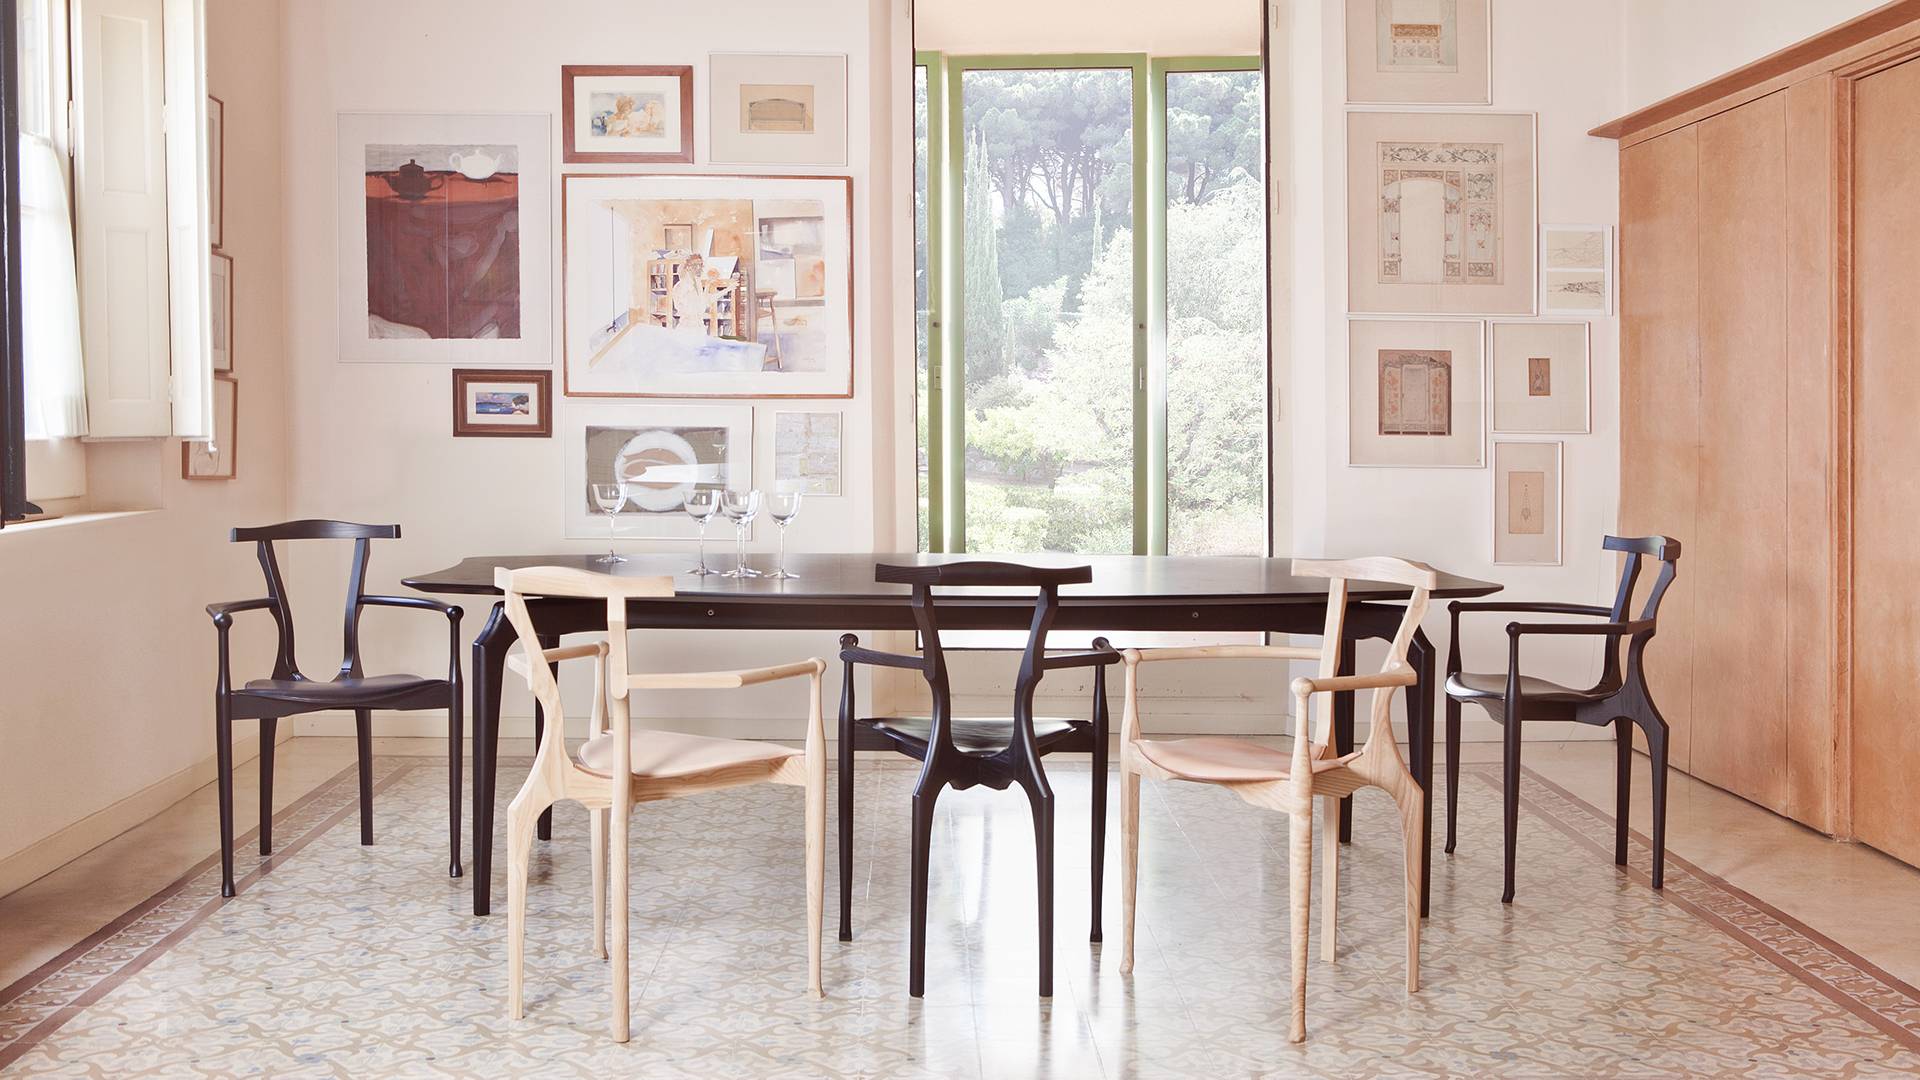 Gaulino Chairs & Table, Lifestyle